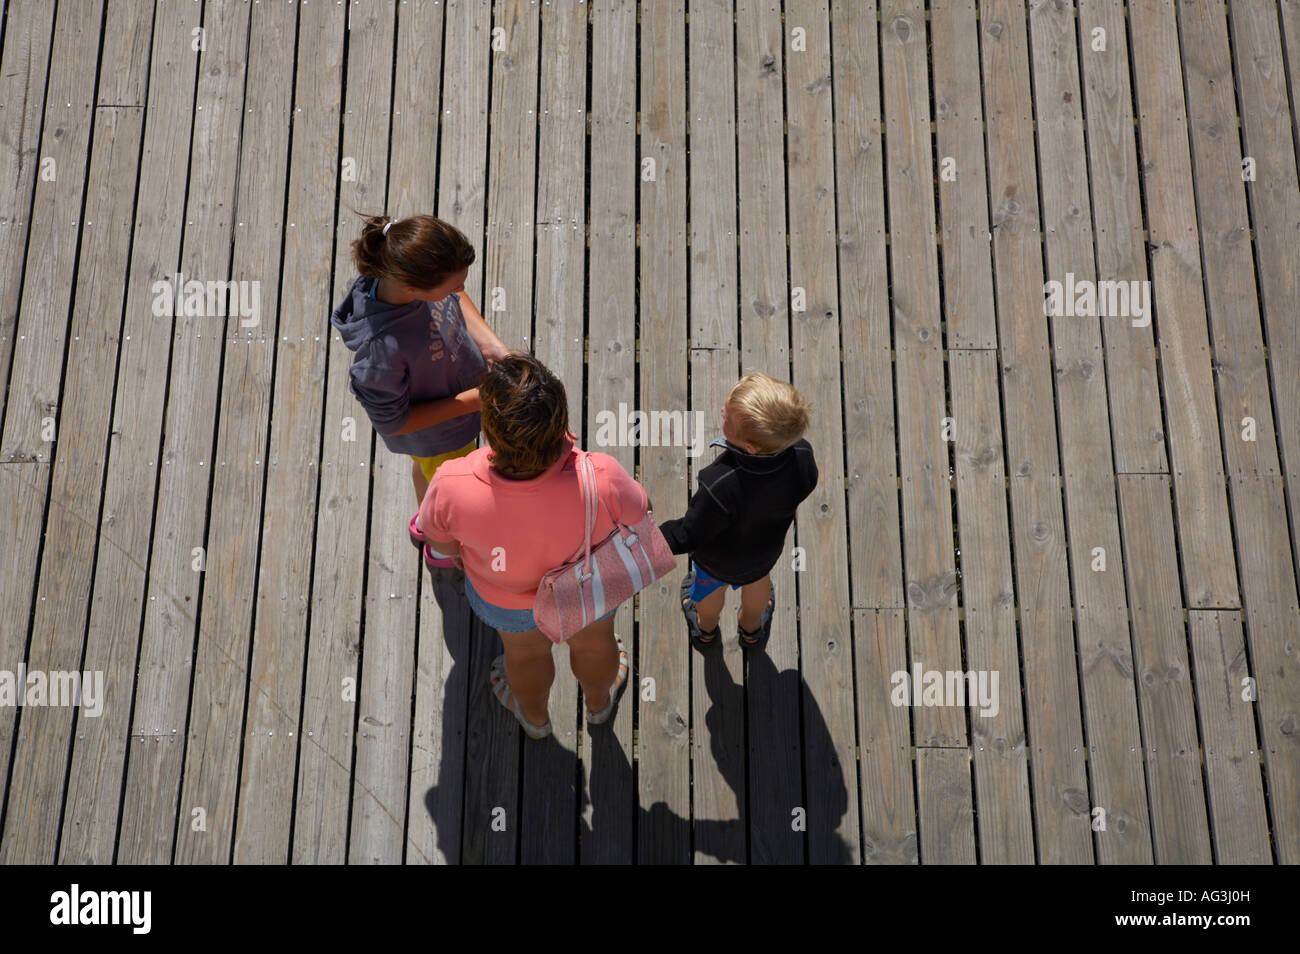 People standing on wooden dock taken from above Stock Photo